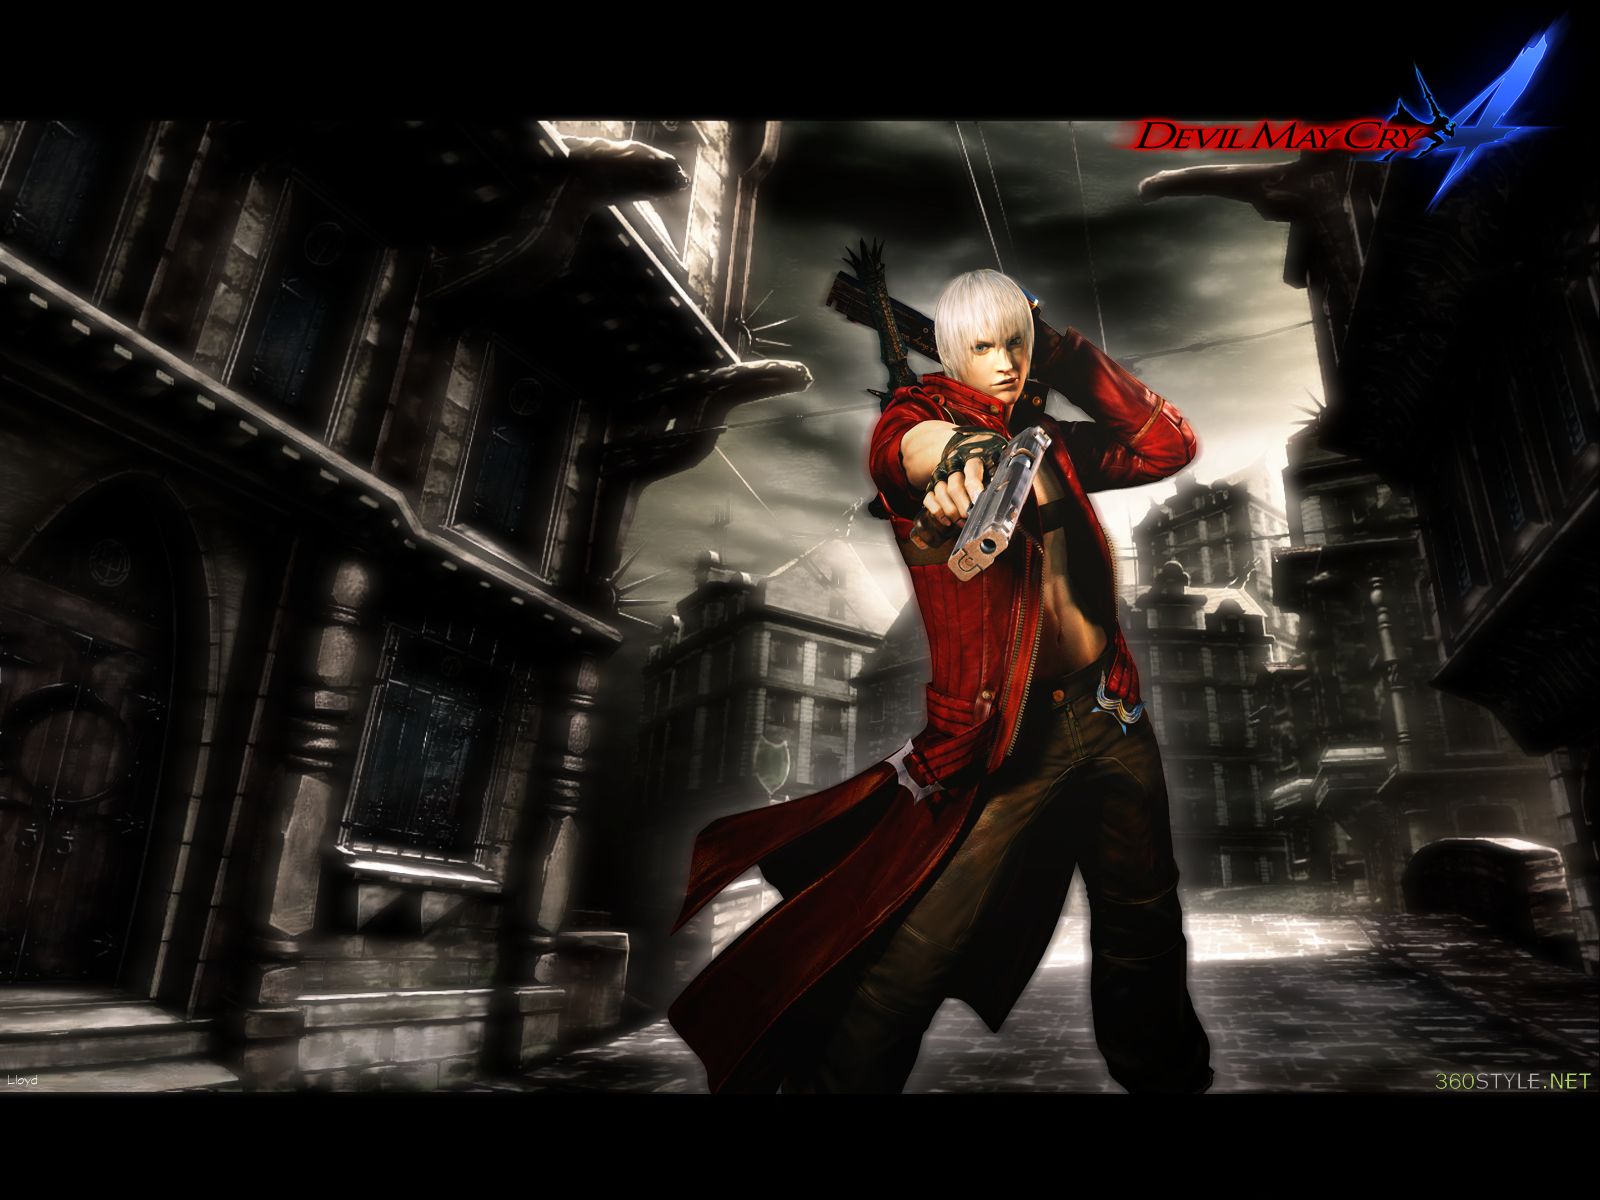 Devil May Cry 4 Wallpapers Hd